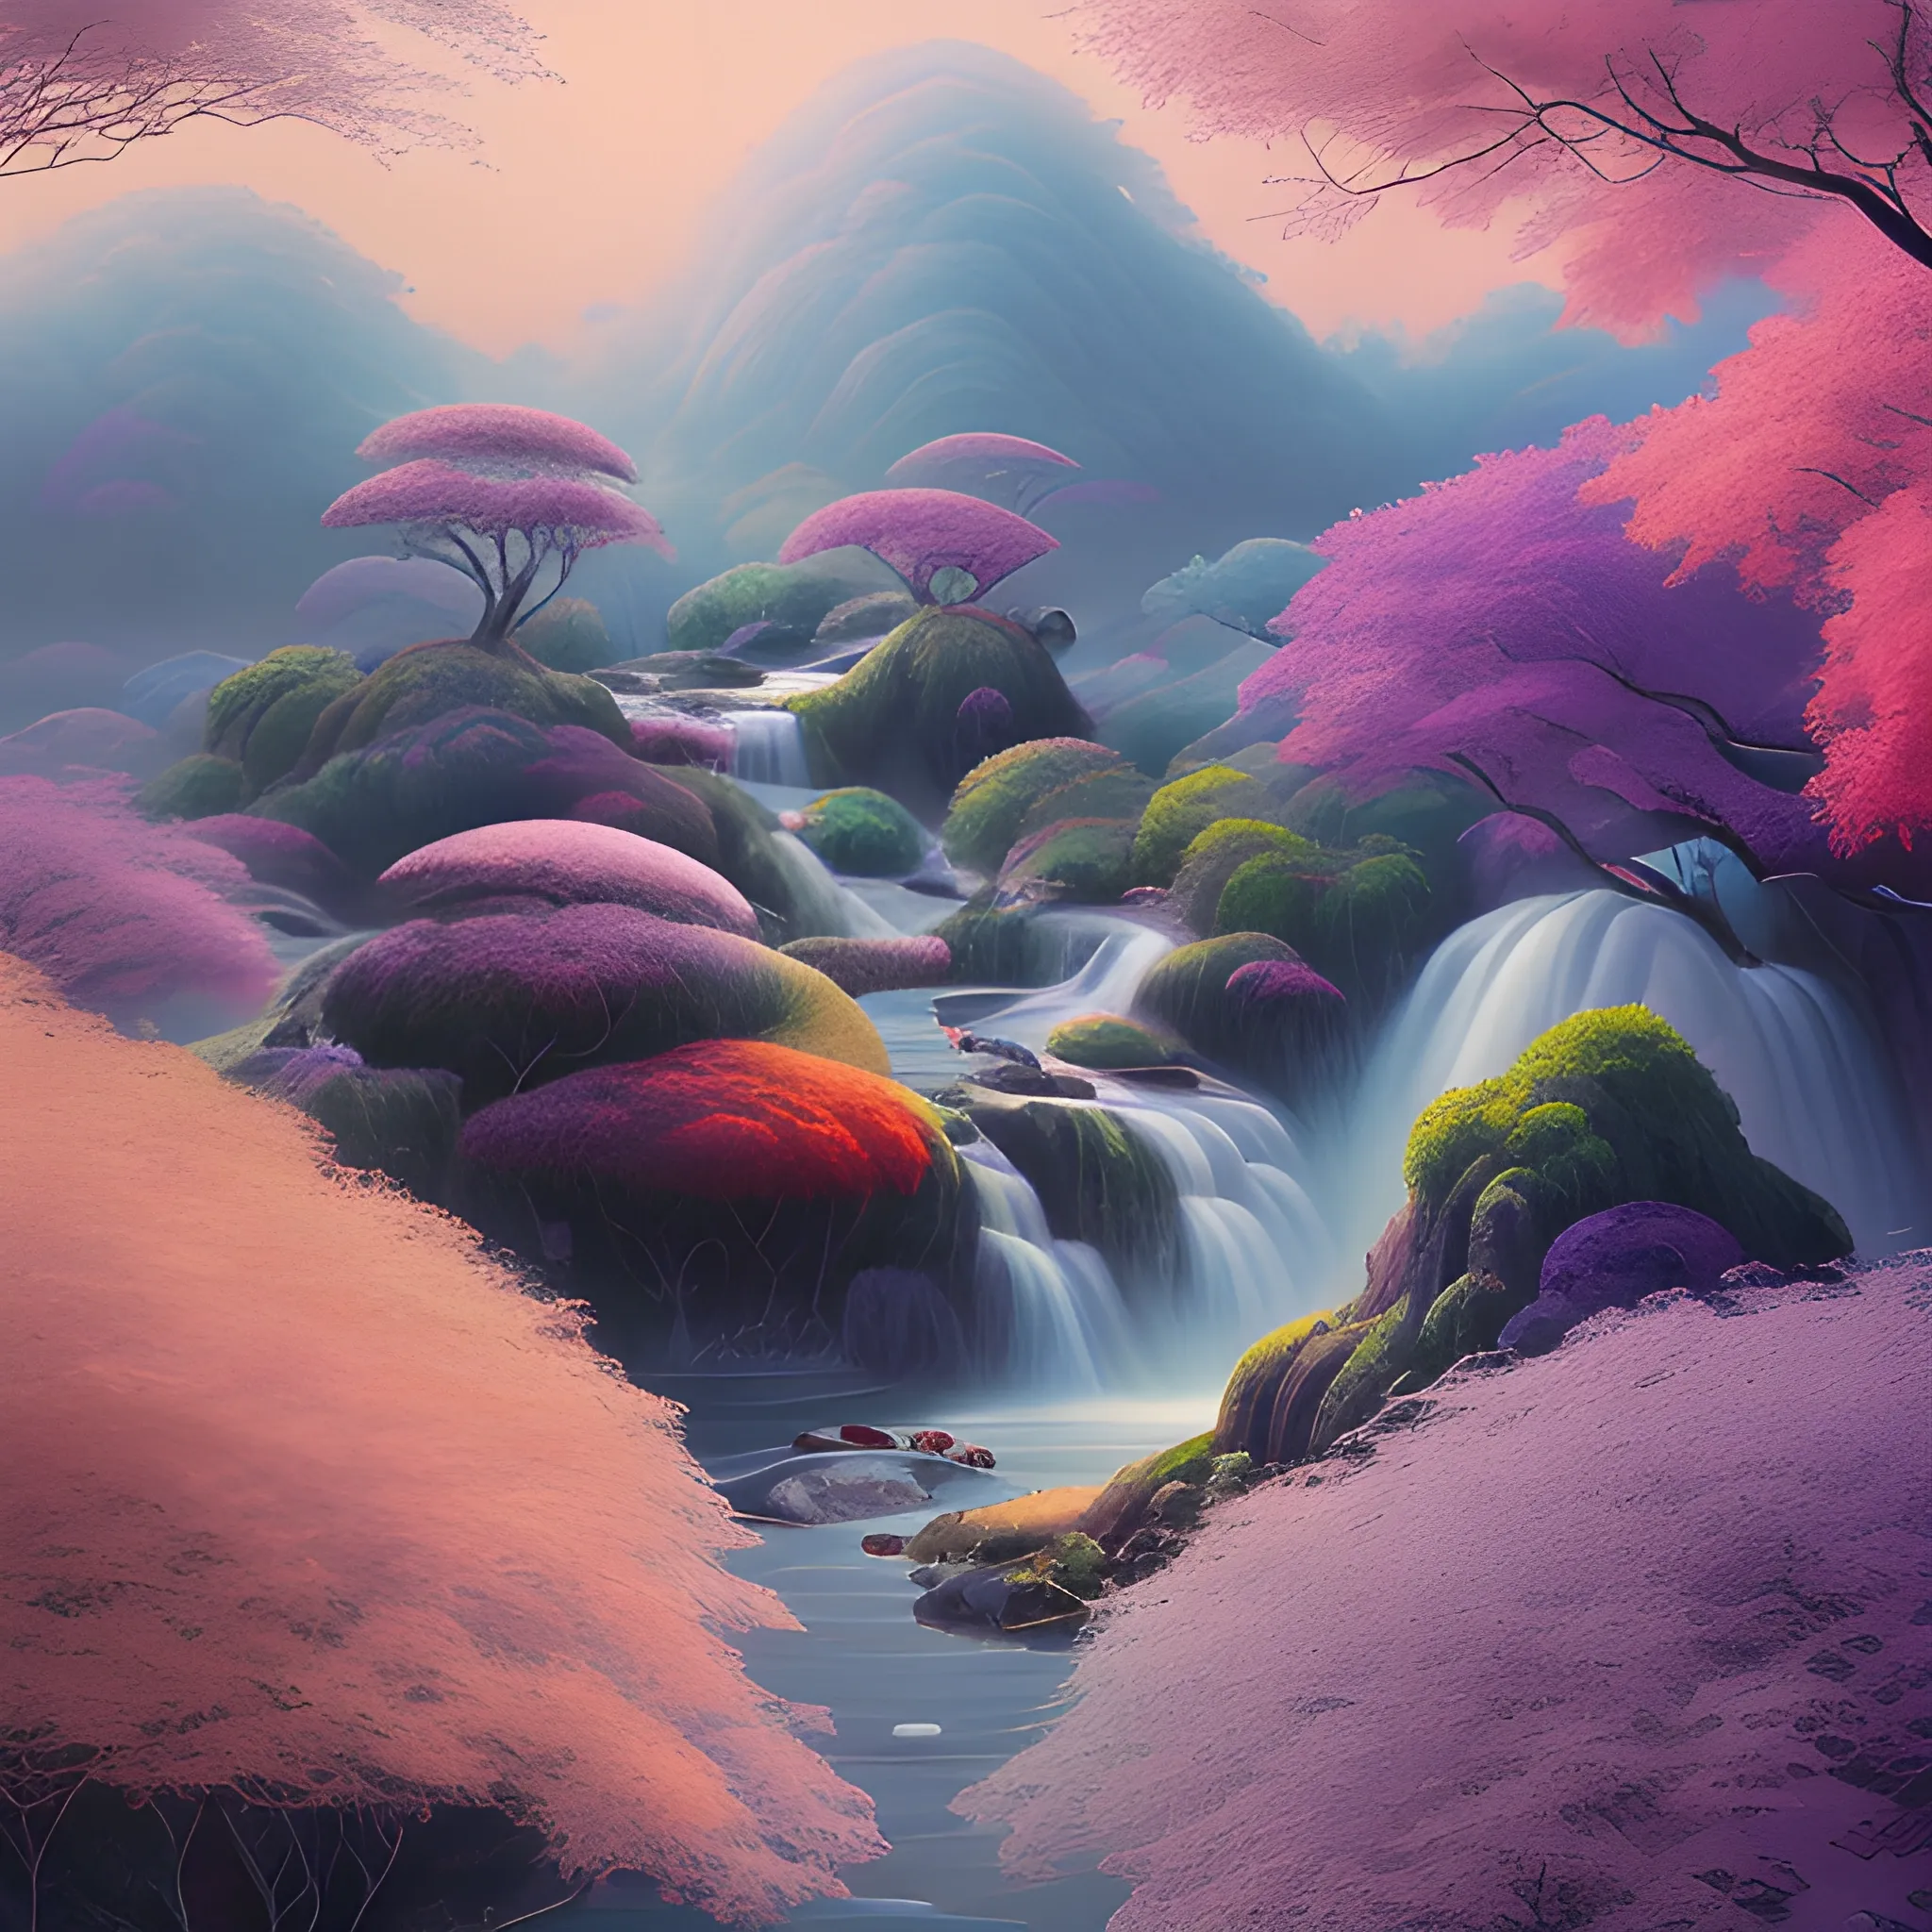 (by Ananta Mandal (and Andrew Biraj:0.5)), (in the style of nihonga), Style: Abstract, Medium: Digital illustration, Subject: An otherworldly landscape with floating islands, cascading waterfalls, and vibrant flora and fauna. Camera Angle: Overhead shot capturing the vastness and intricate details of the scene. The colors are saturated, and the lighting creates a warm and ethereal atmosphere. The painting is highly detailed, with every brushstroke capturing the complexity of the imaginary world., (high quality), (detailed), (masterpiece), (best quality), (highres), (extremely detailed), (8k), seed:1015689